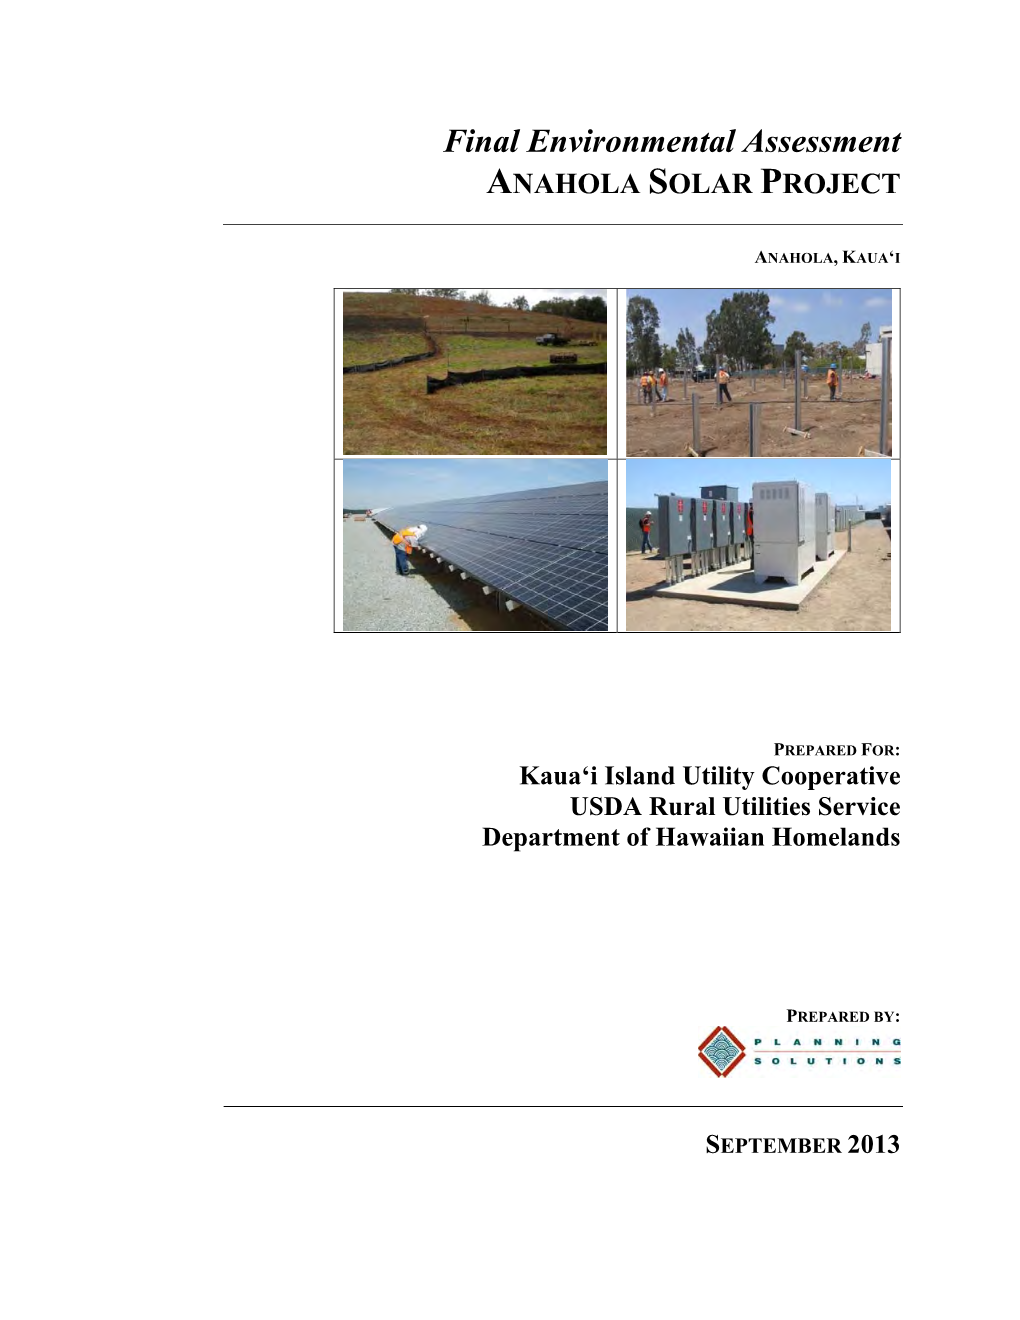 Final Environmental Assessment ANAHOLA SOLAR PROJECT